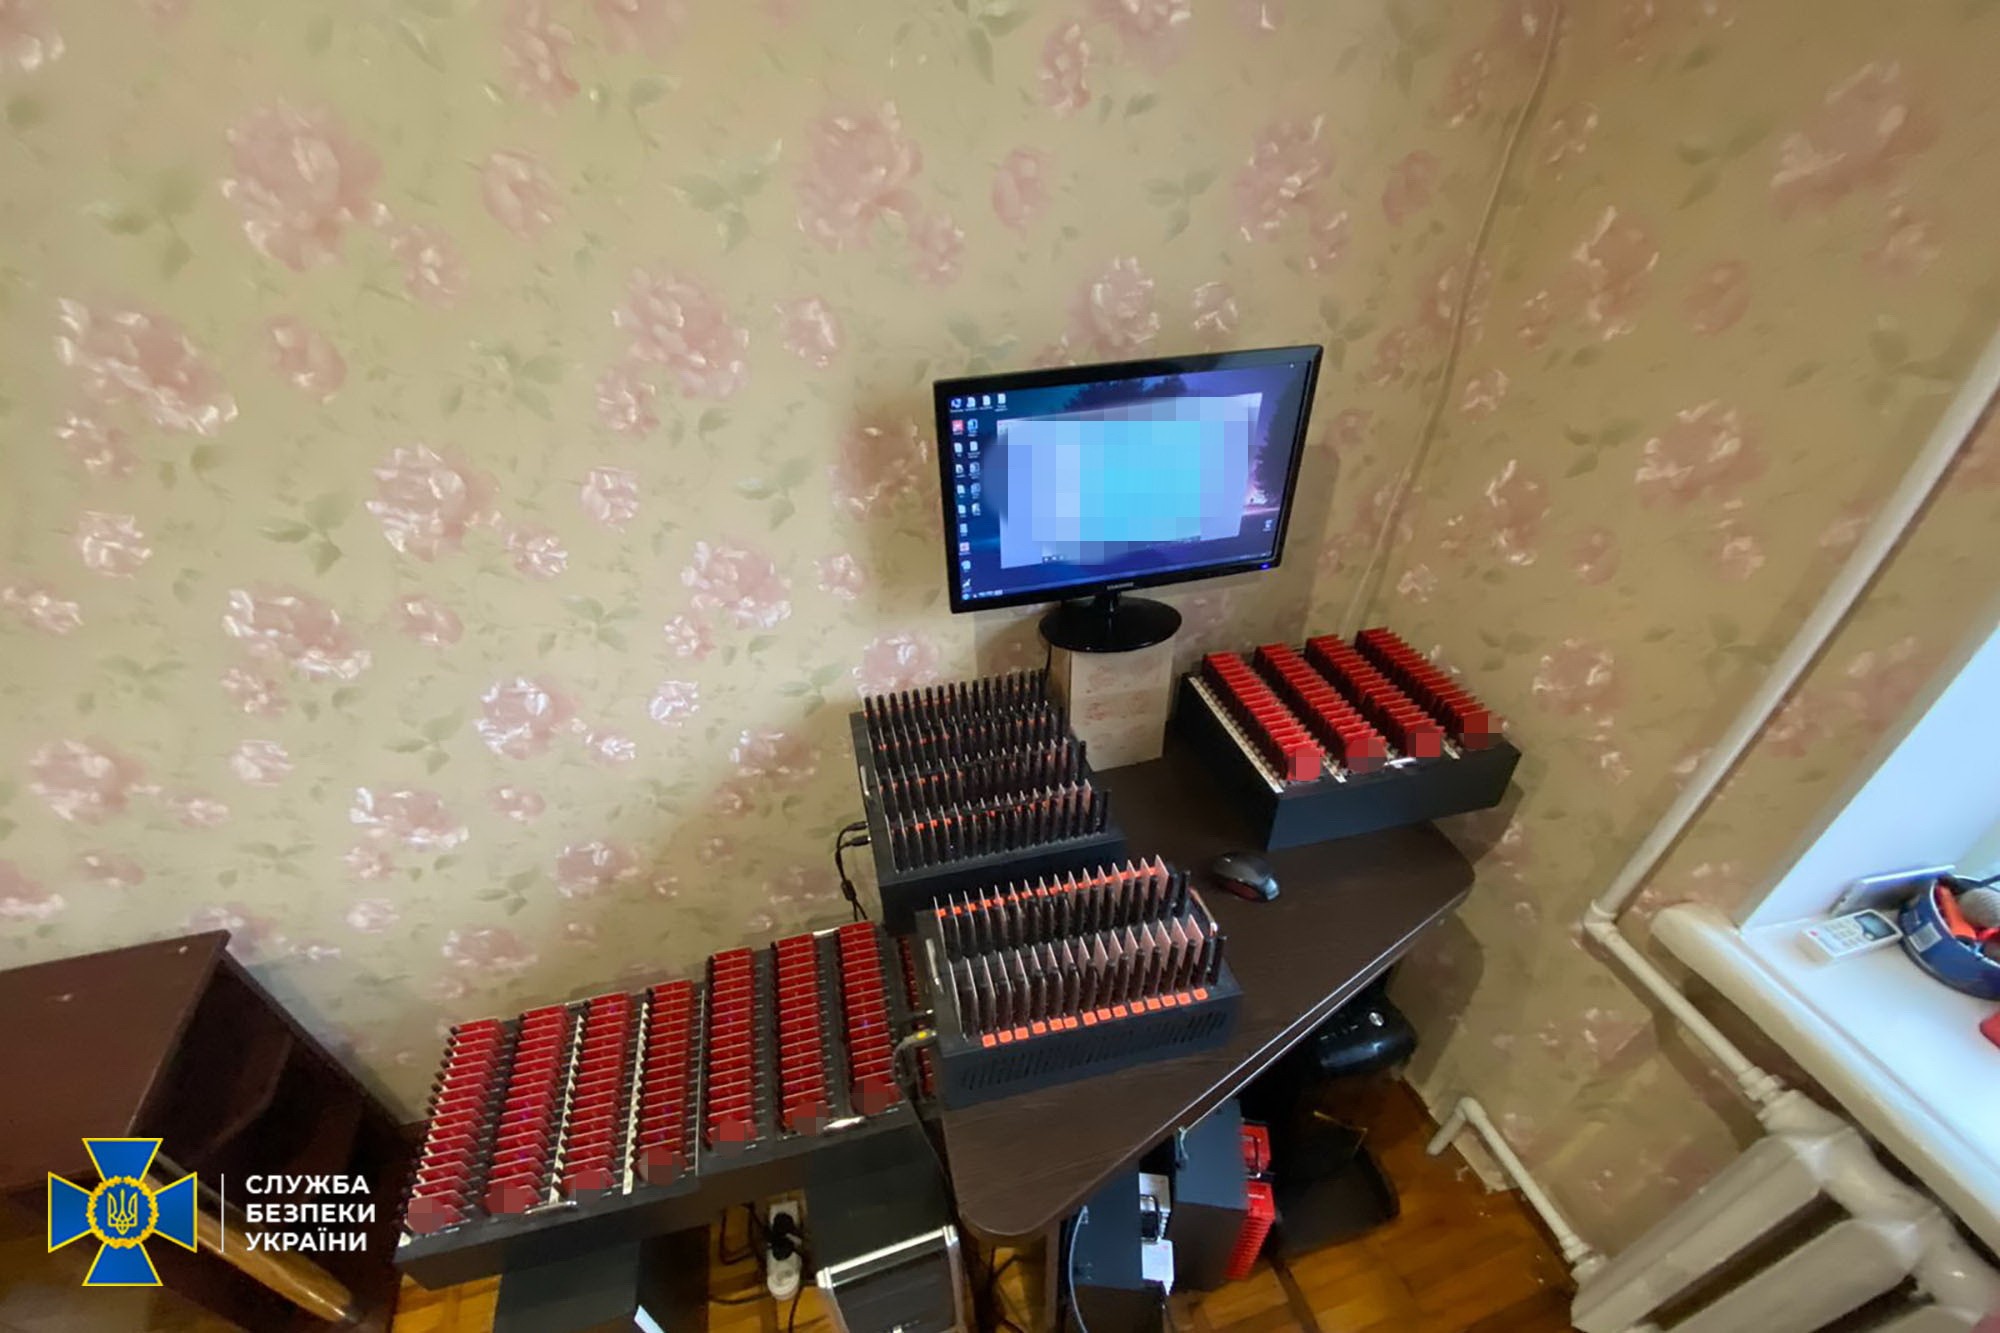 Security Service busts Russia-backed bot farm in Kherson Oblast